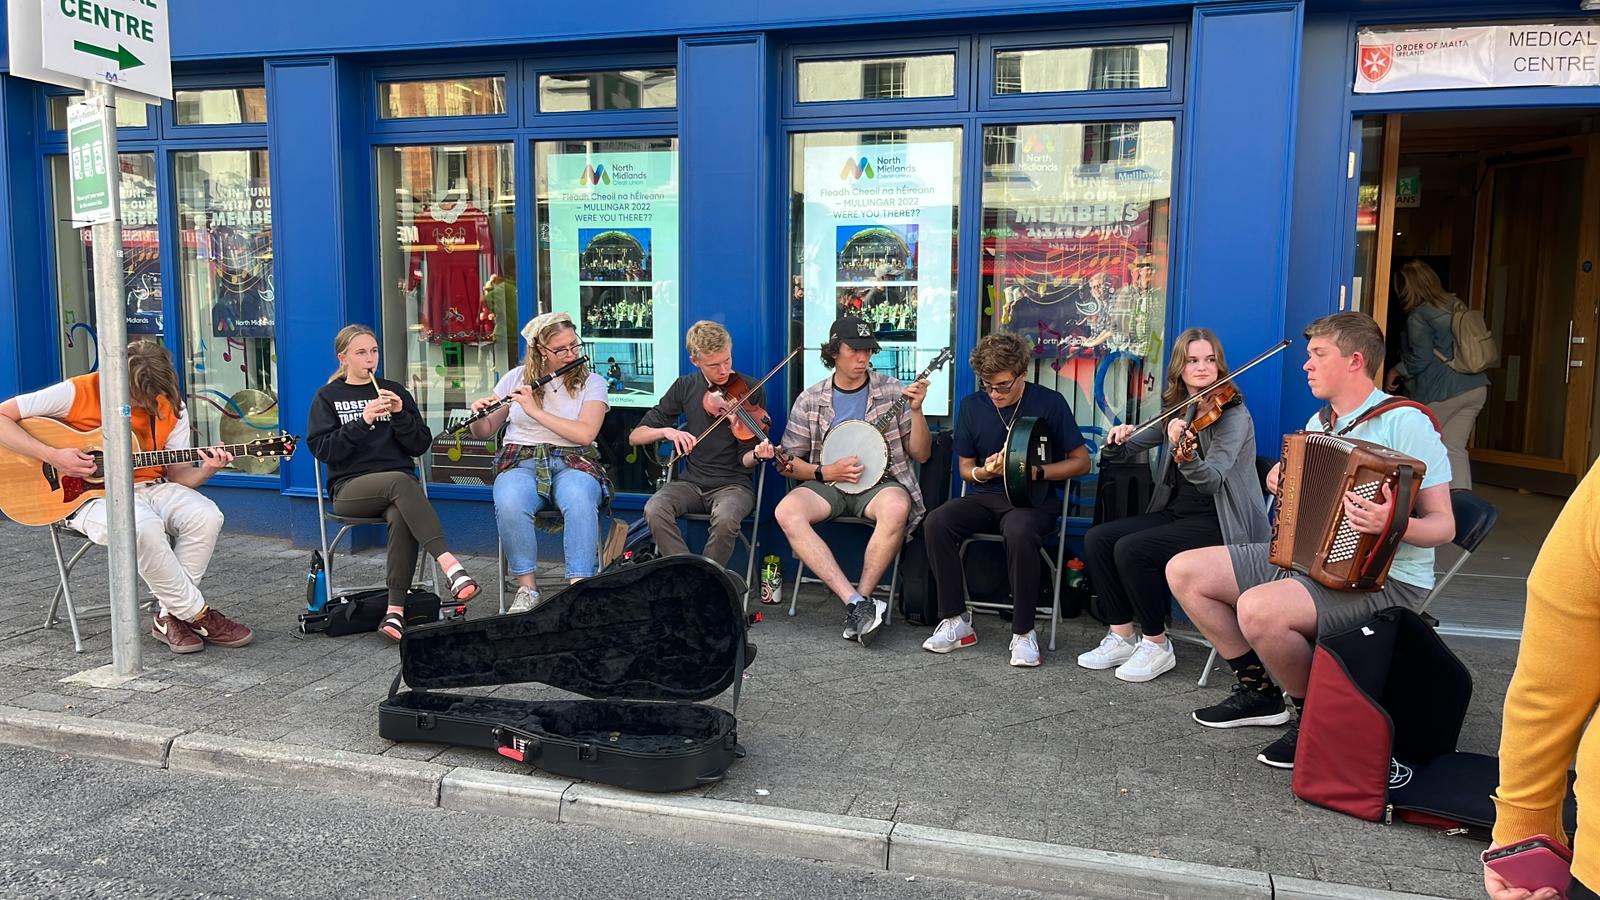 We were proud of our teens who made tons of new friends at the Scoil Éigse workshops and sessions. Here they are busking with a new friend, on the accordion on far right.